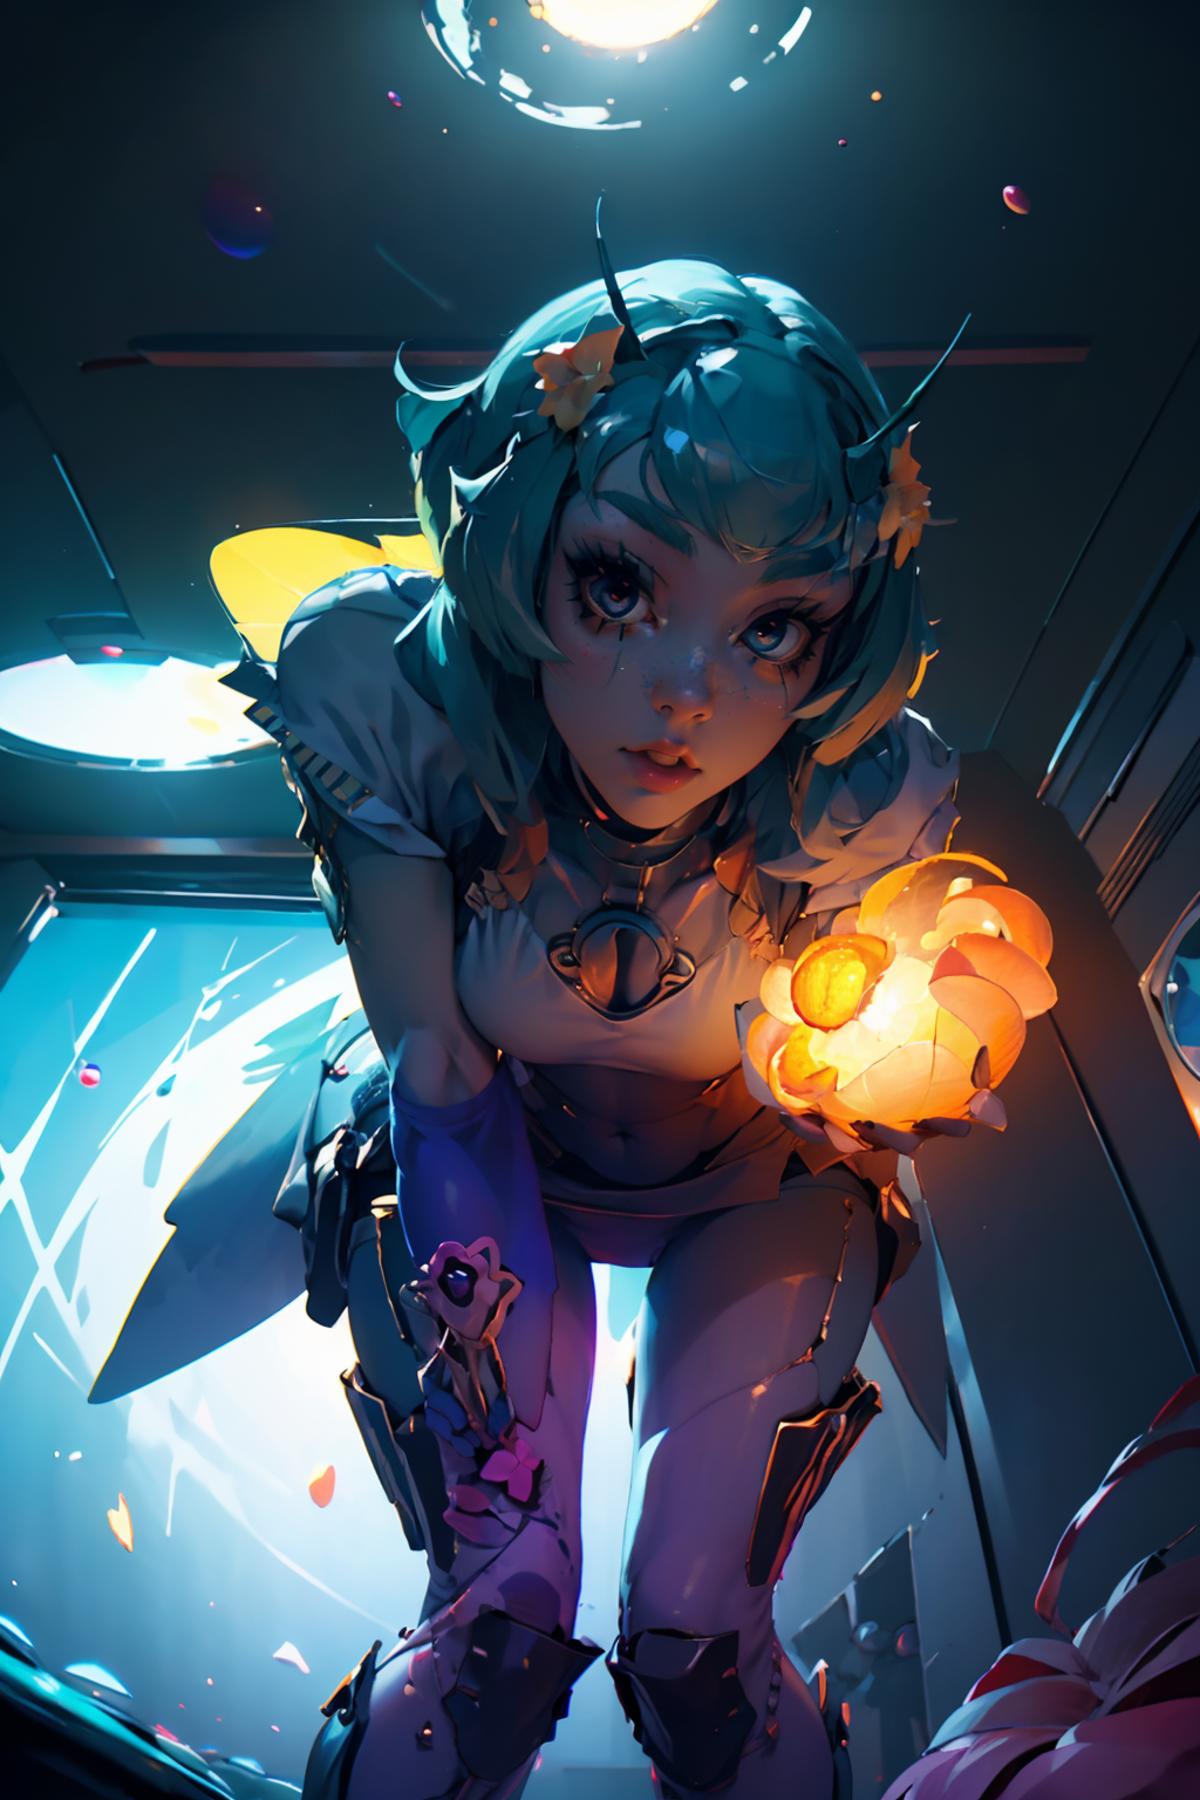 Space Girl image by ClamJam